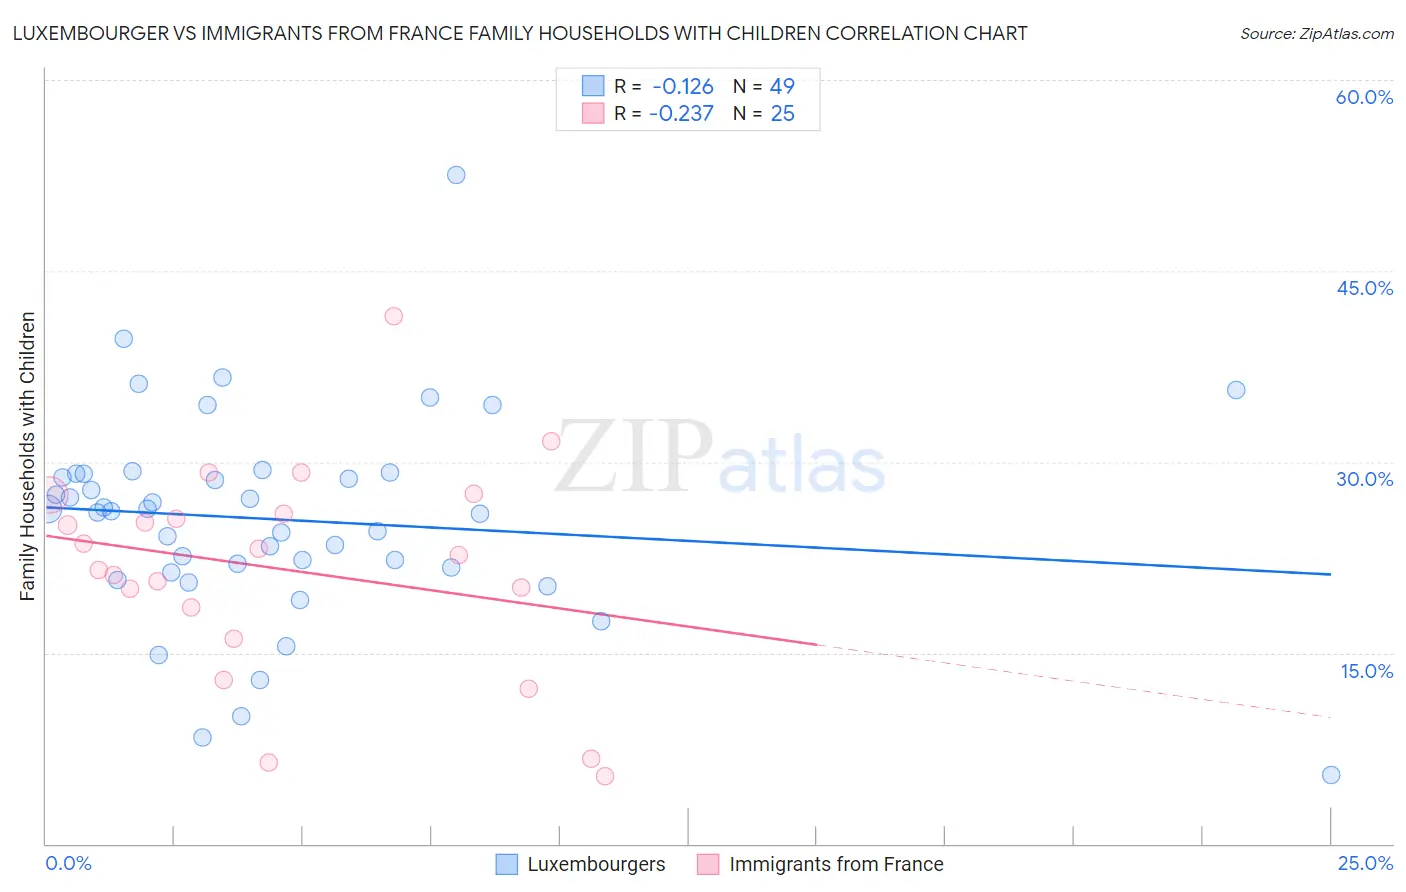 Luxembourger vs Immigrants from France Family Households with Children